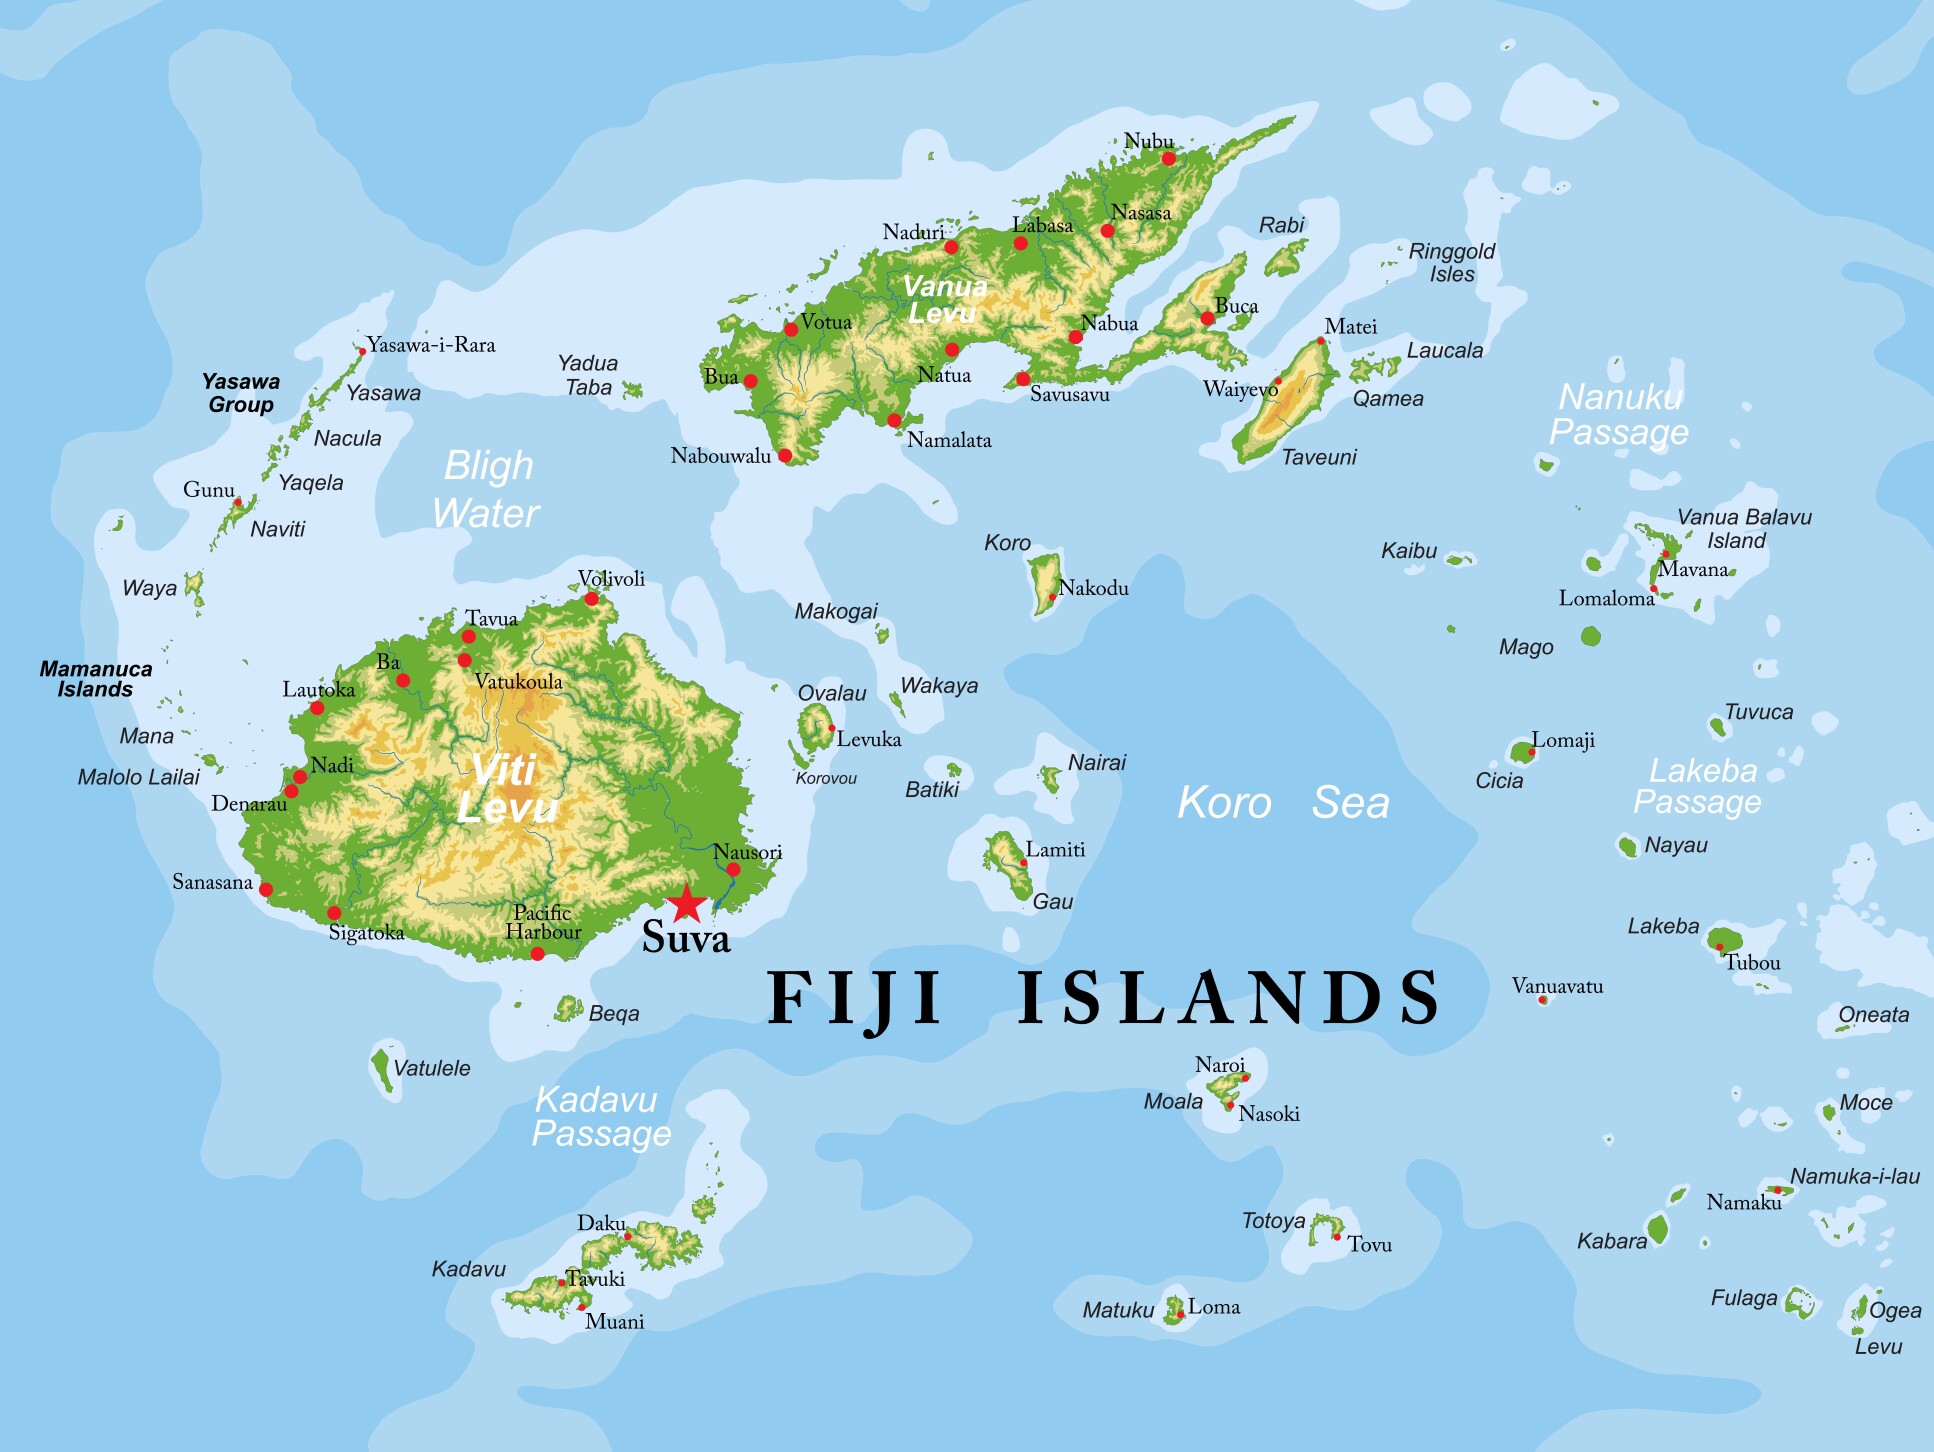 A map of Fiji. 98% of the country’s territory is sea